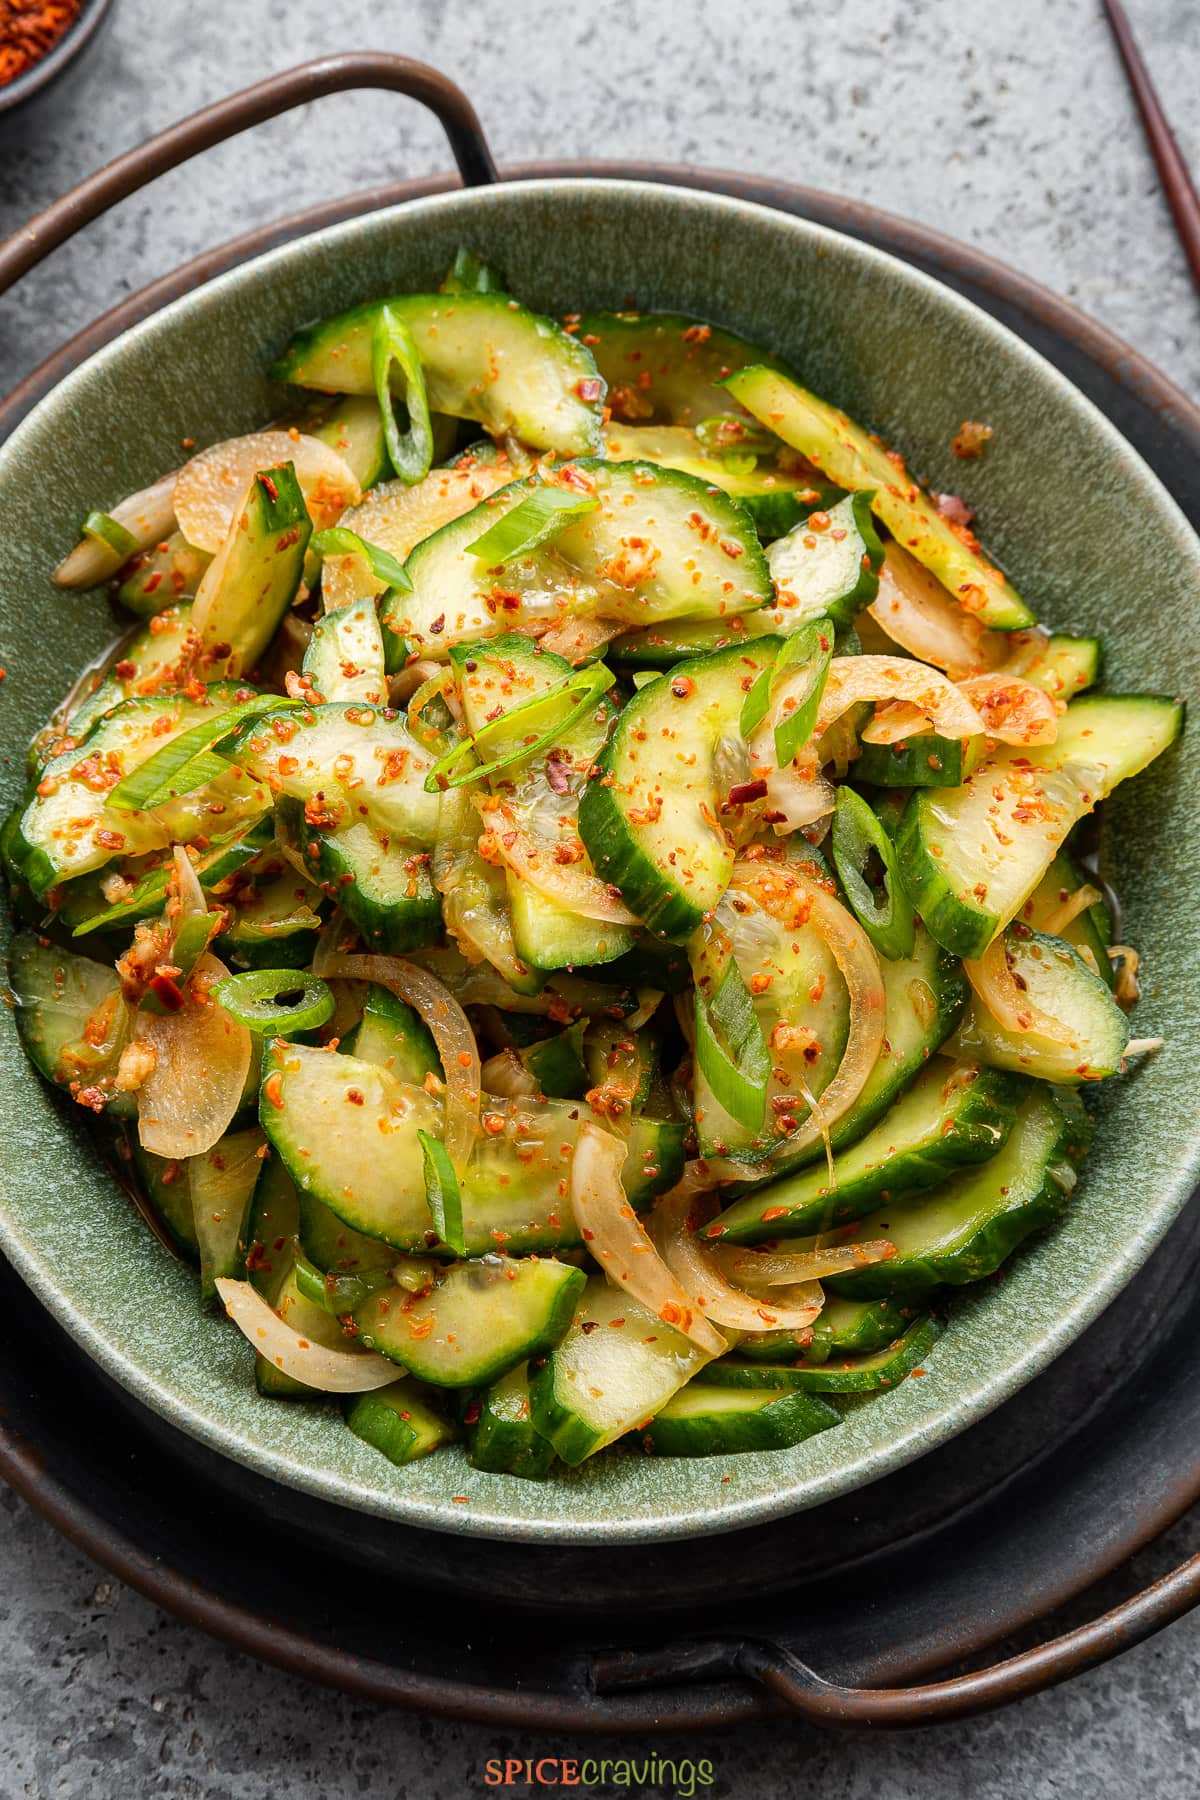 sliced cucumber salad with onion and red pepper flakes